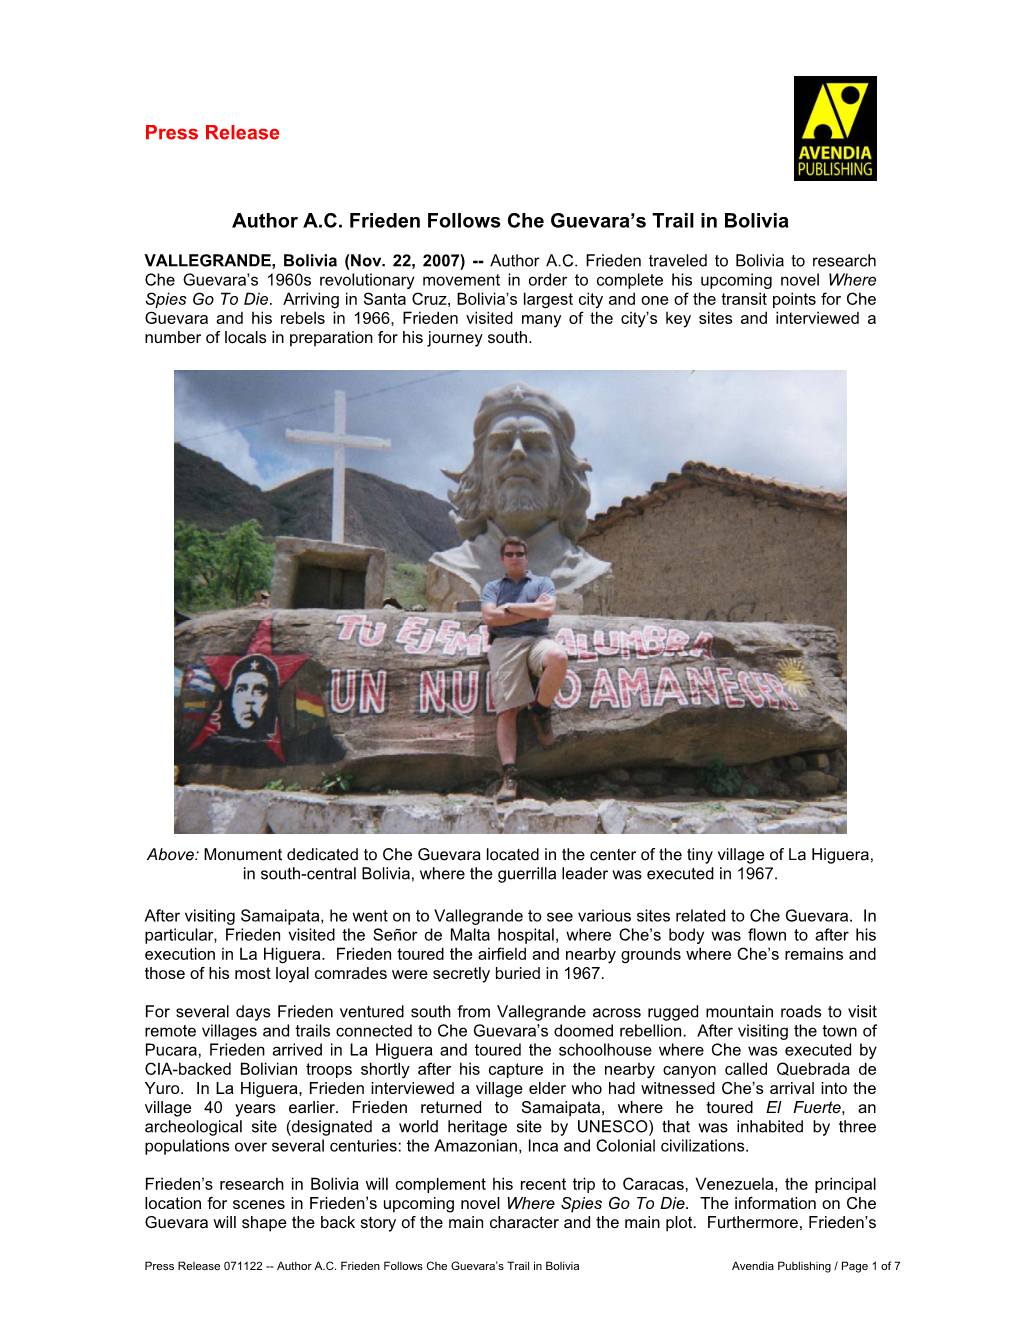 Press Release Author A.C. Frieden Follows Che Guevara's Trail in Bolivia